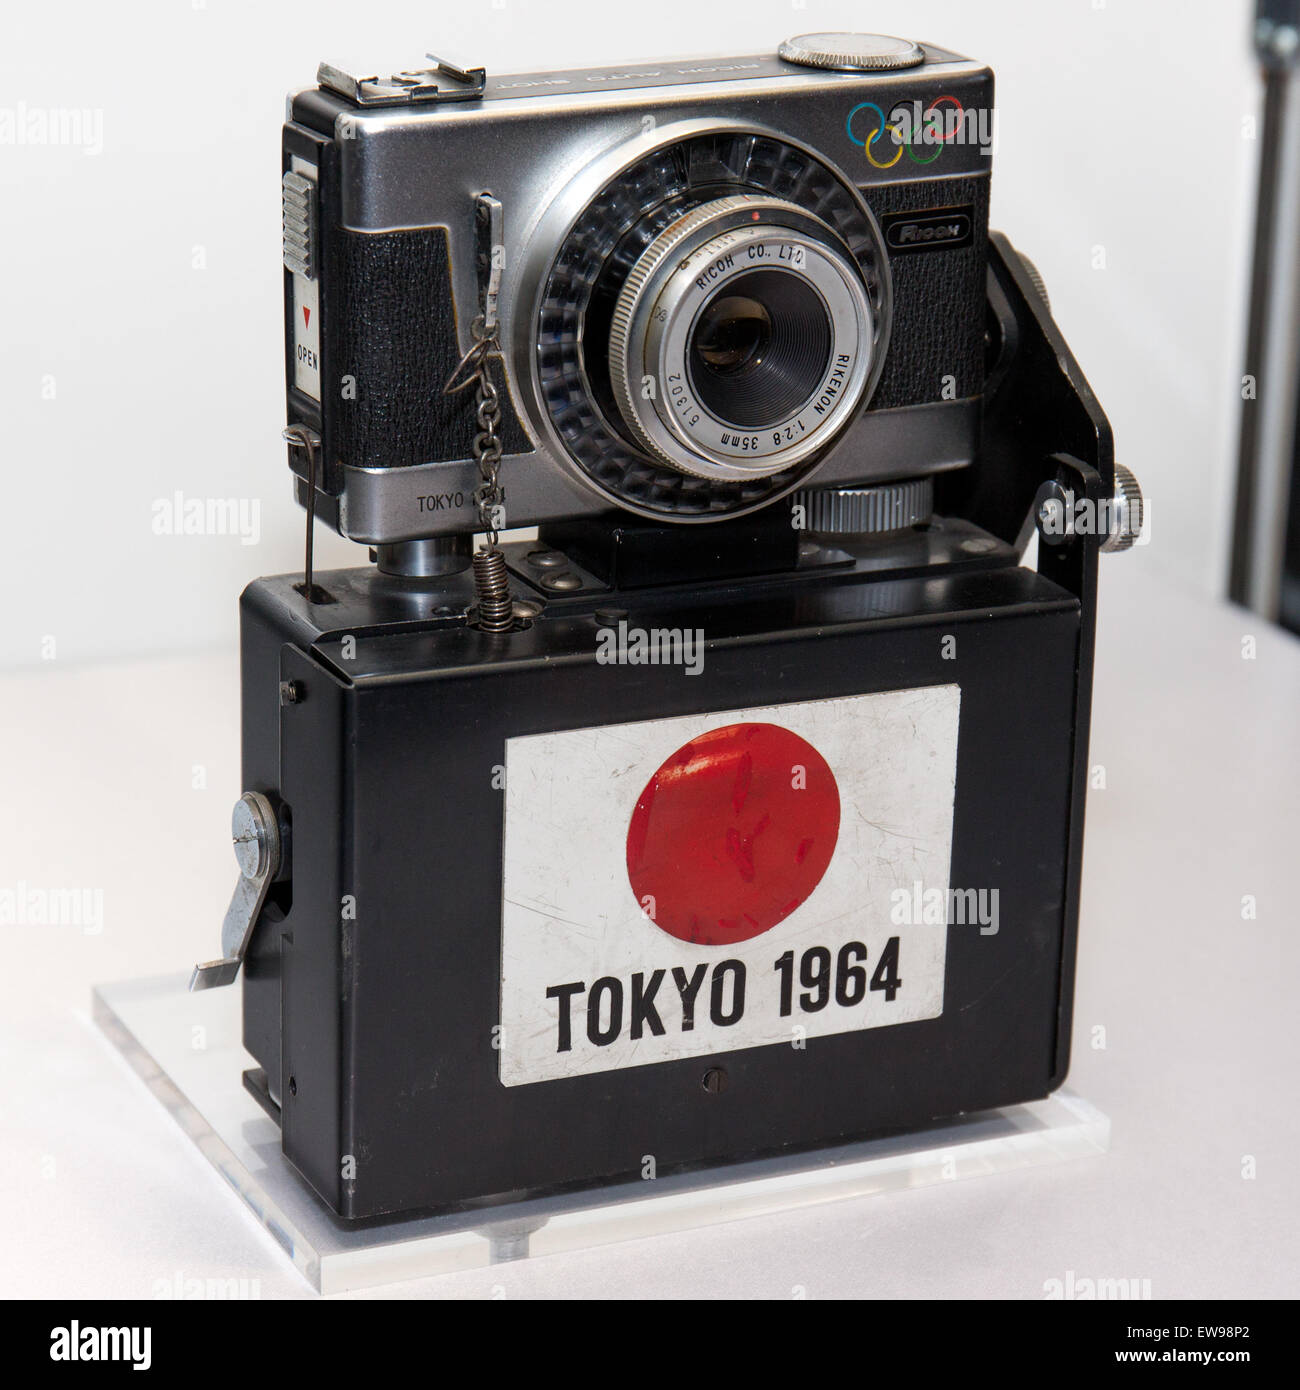 Ricoh Auto Shot for 1964 Summer Olympics finish line recording 1 2014 CP Stock Photo